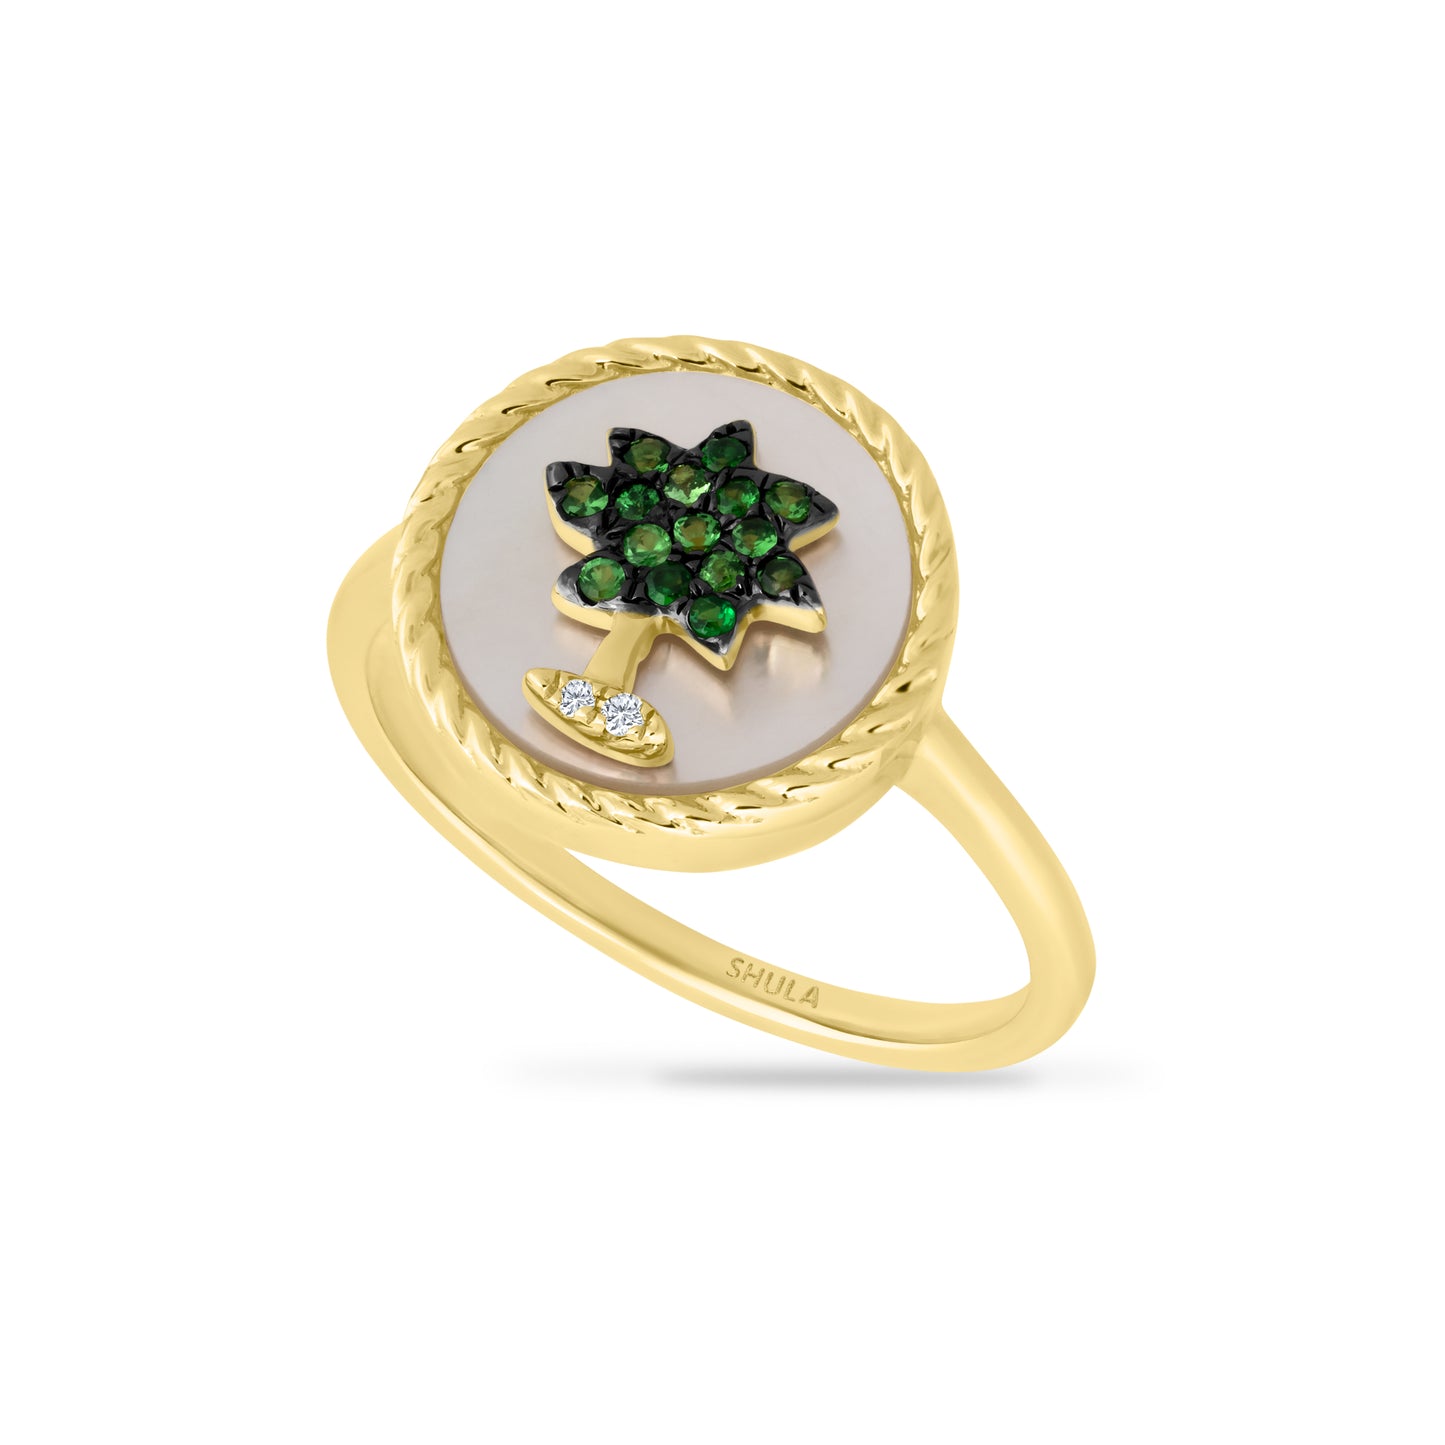 14K PALM TREE RING WITH 2 DIAMONDS 0.01CT, 15 GREEN GARNETS 0.11CT & 1 MOTHER OF PEARL IN 13MM DIAMETER